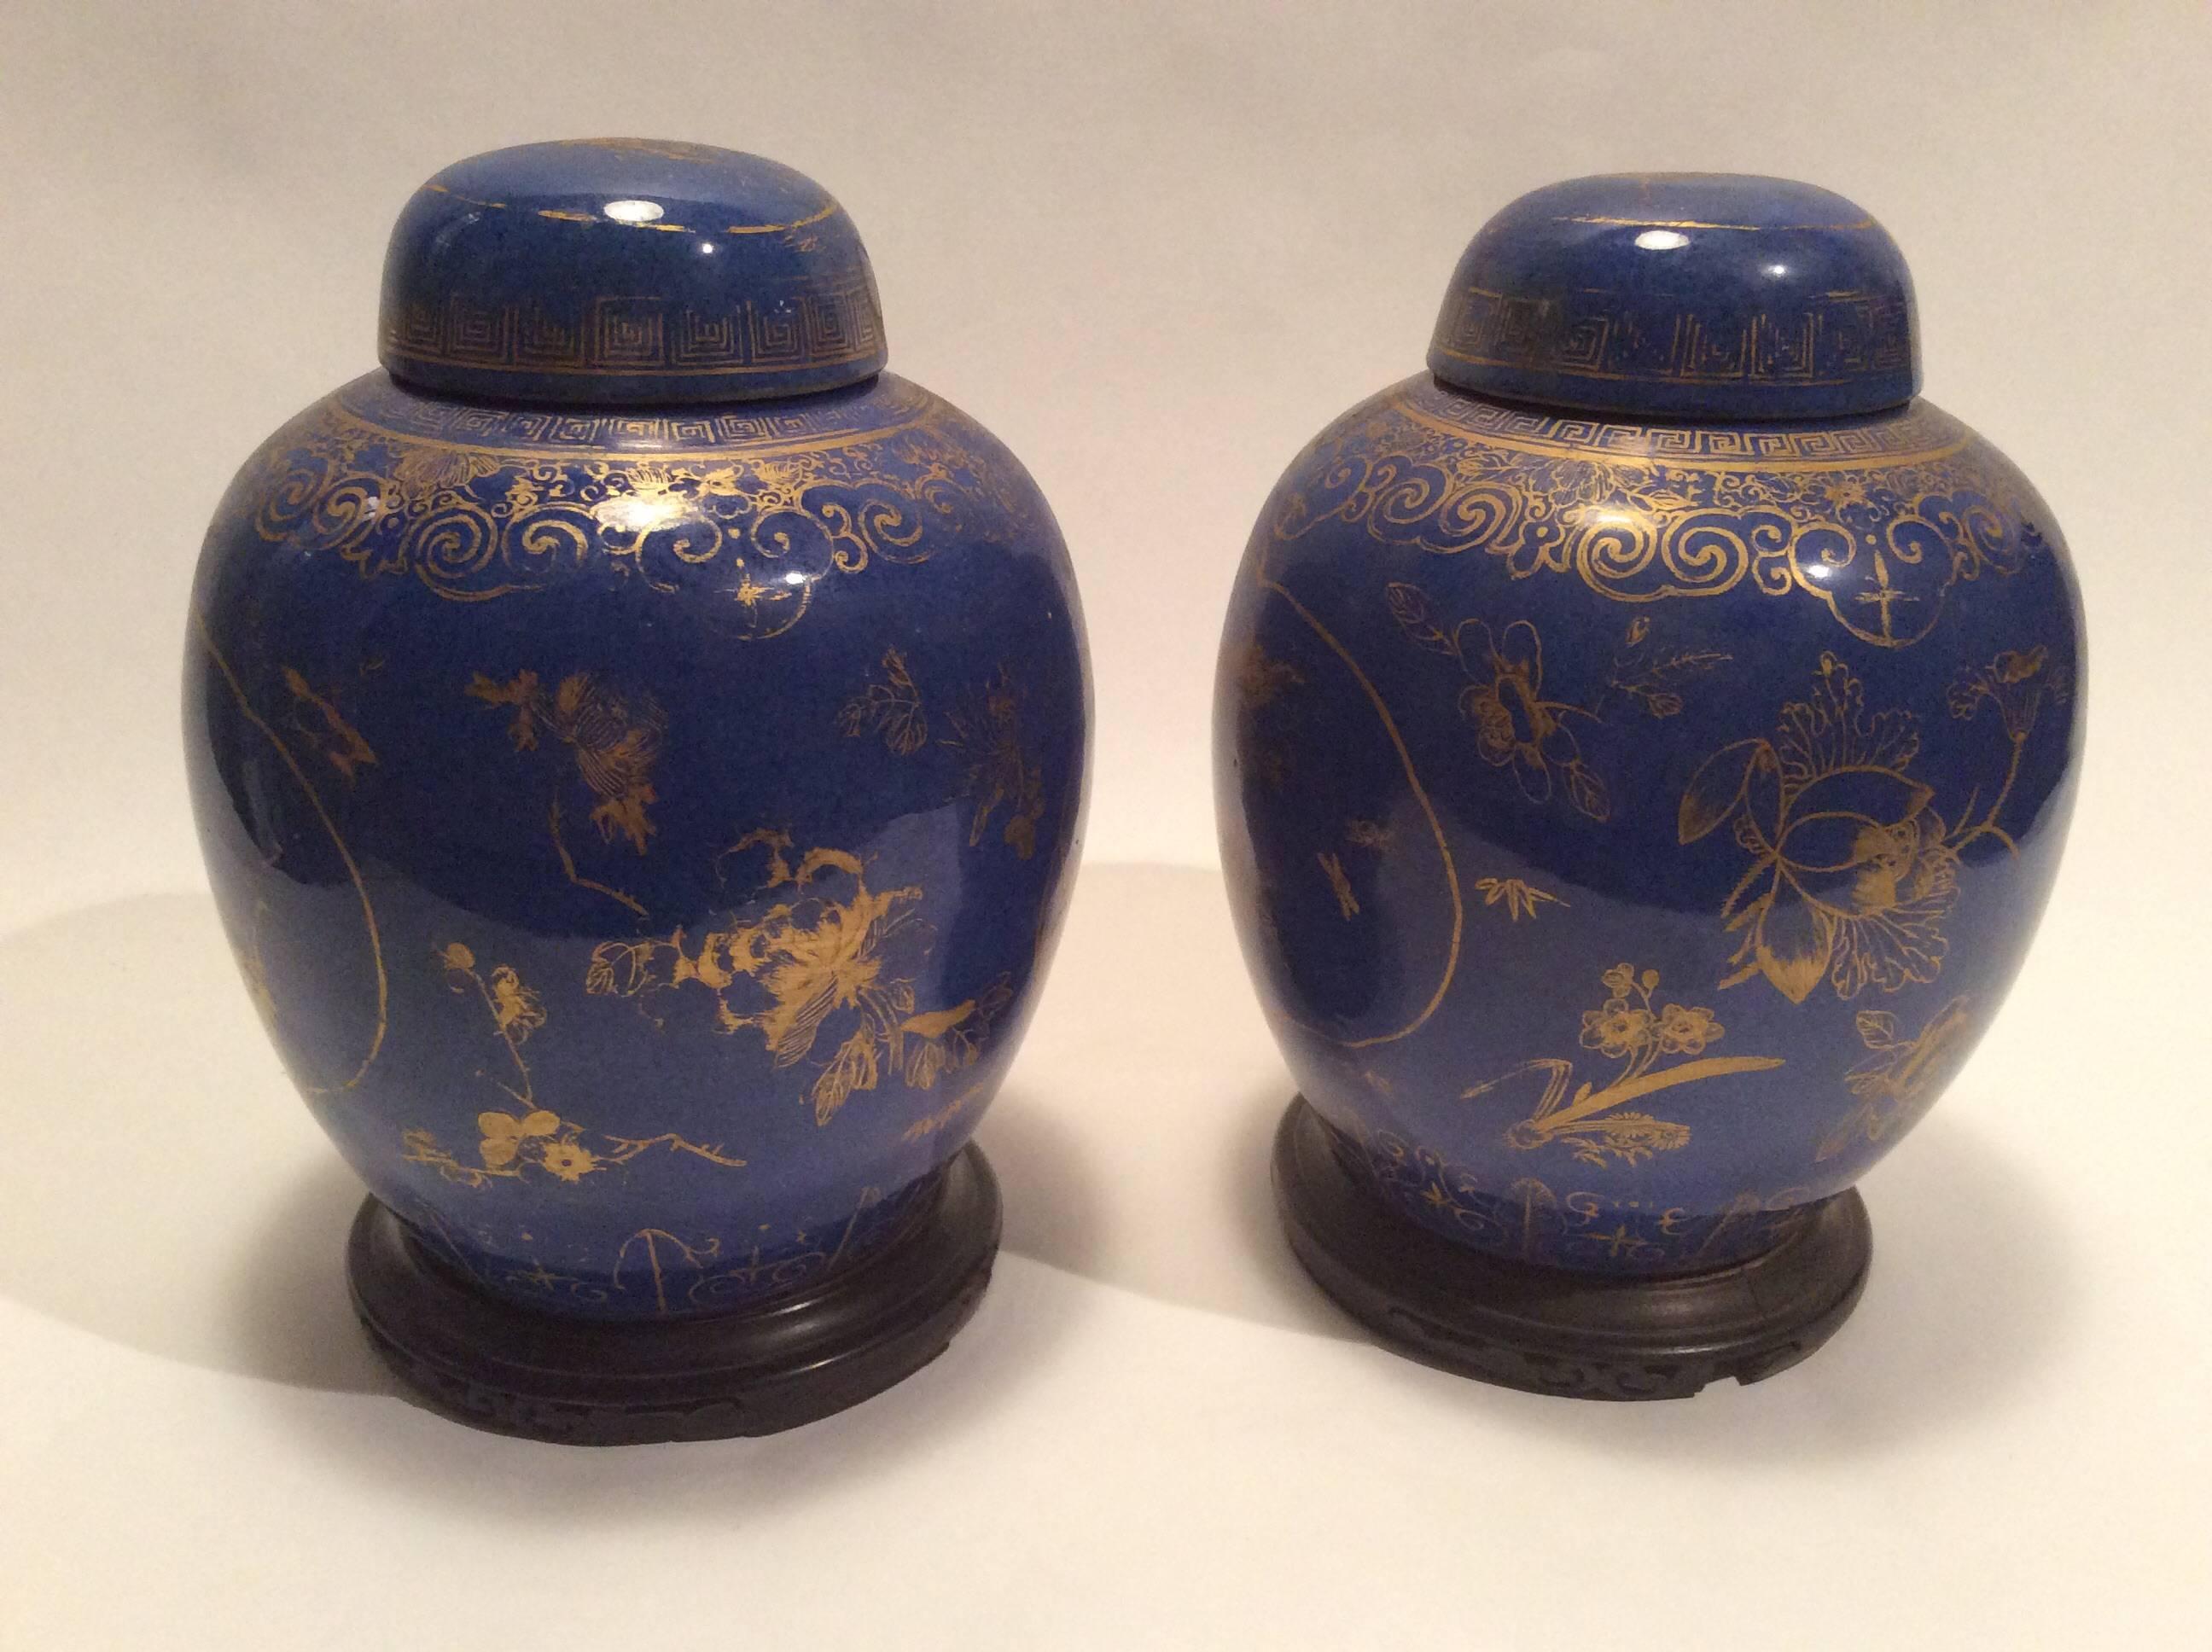 Unusual in that we have here a solid cobalt background with gilt decoration. These were purchased in the 1920s at the renowned importer of Chinese ceramics Ovington's in New York.
 